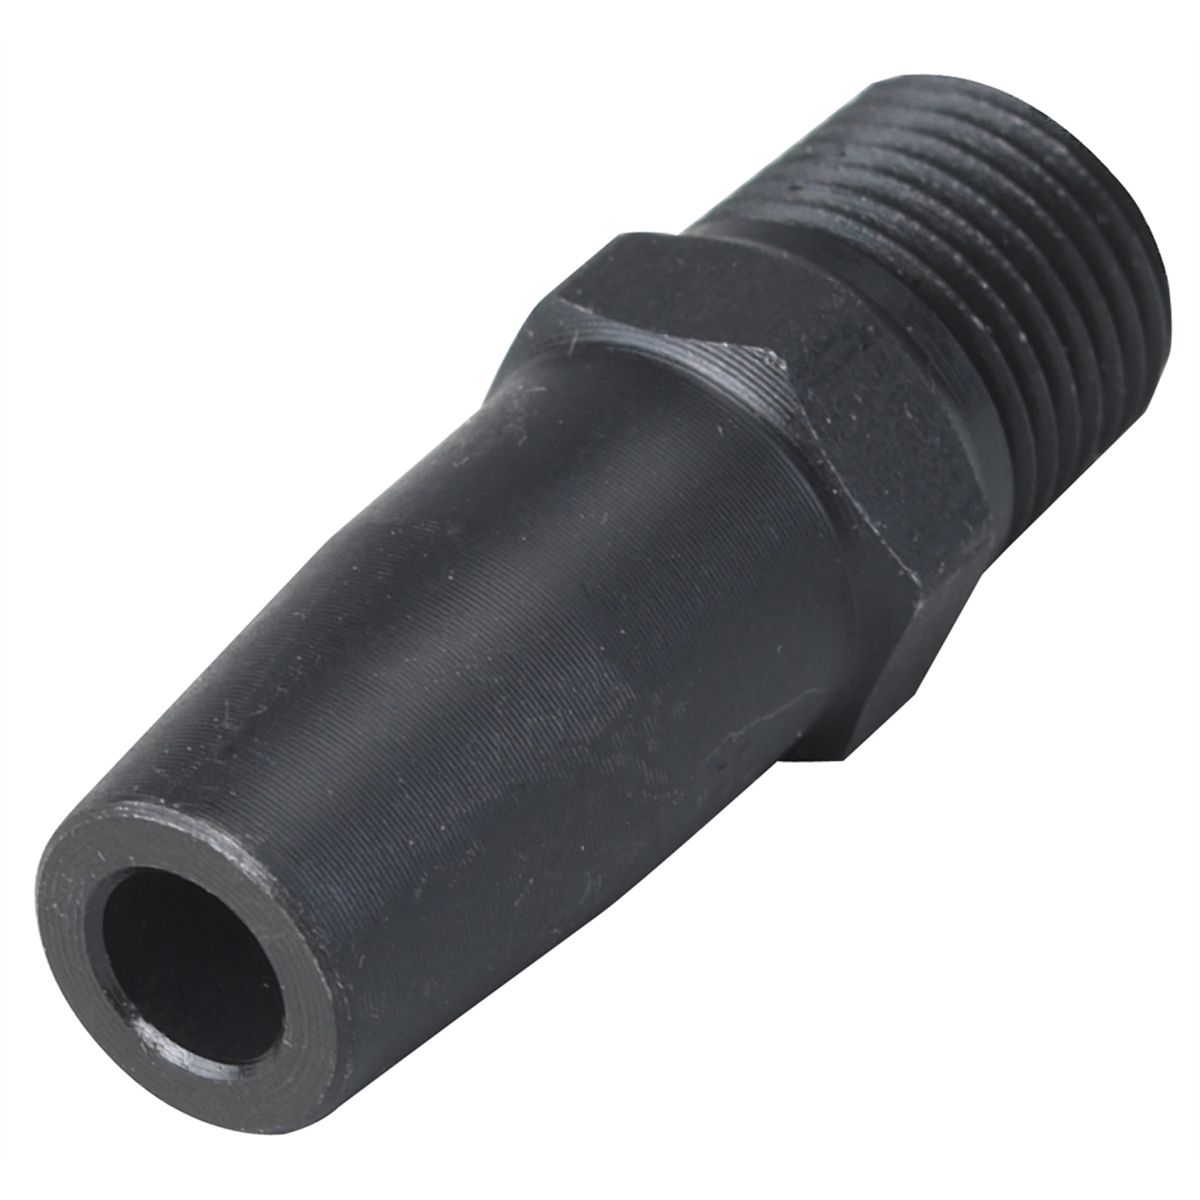 Kent-Moore DT-51190-A Transmission Oil Fill Adapter